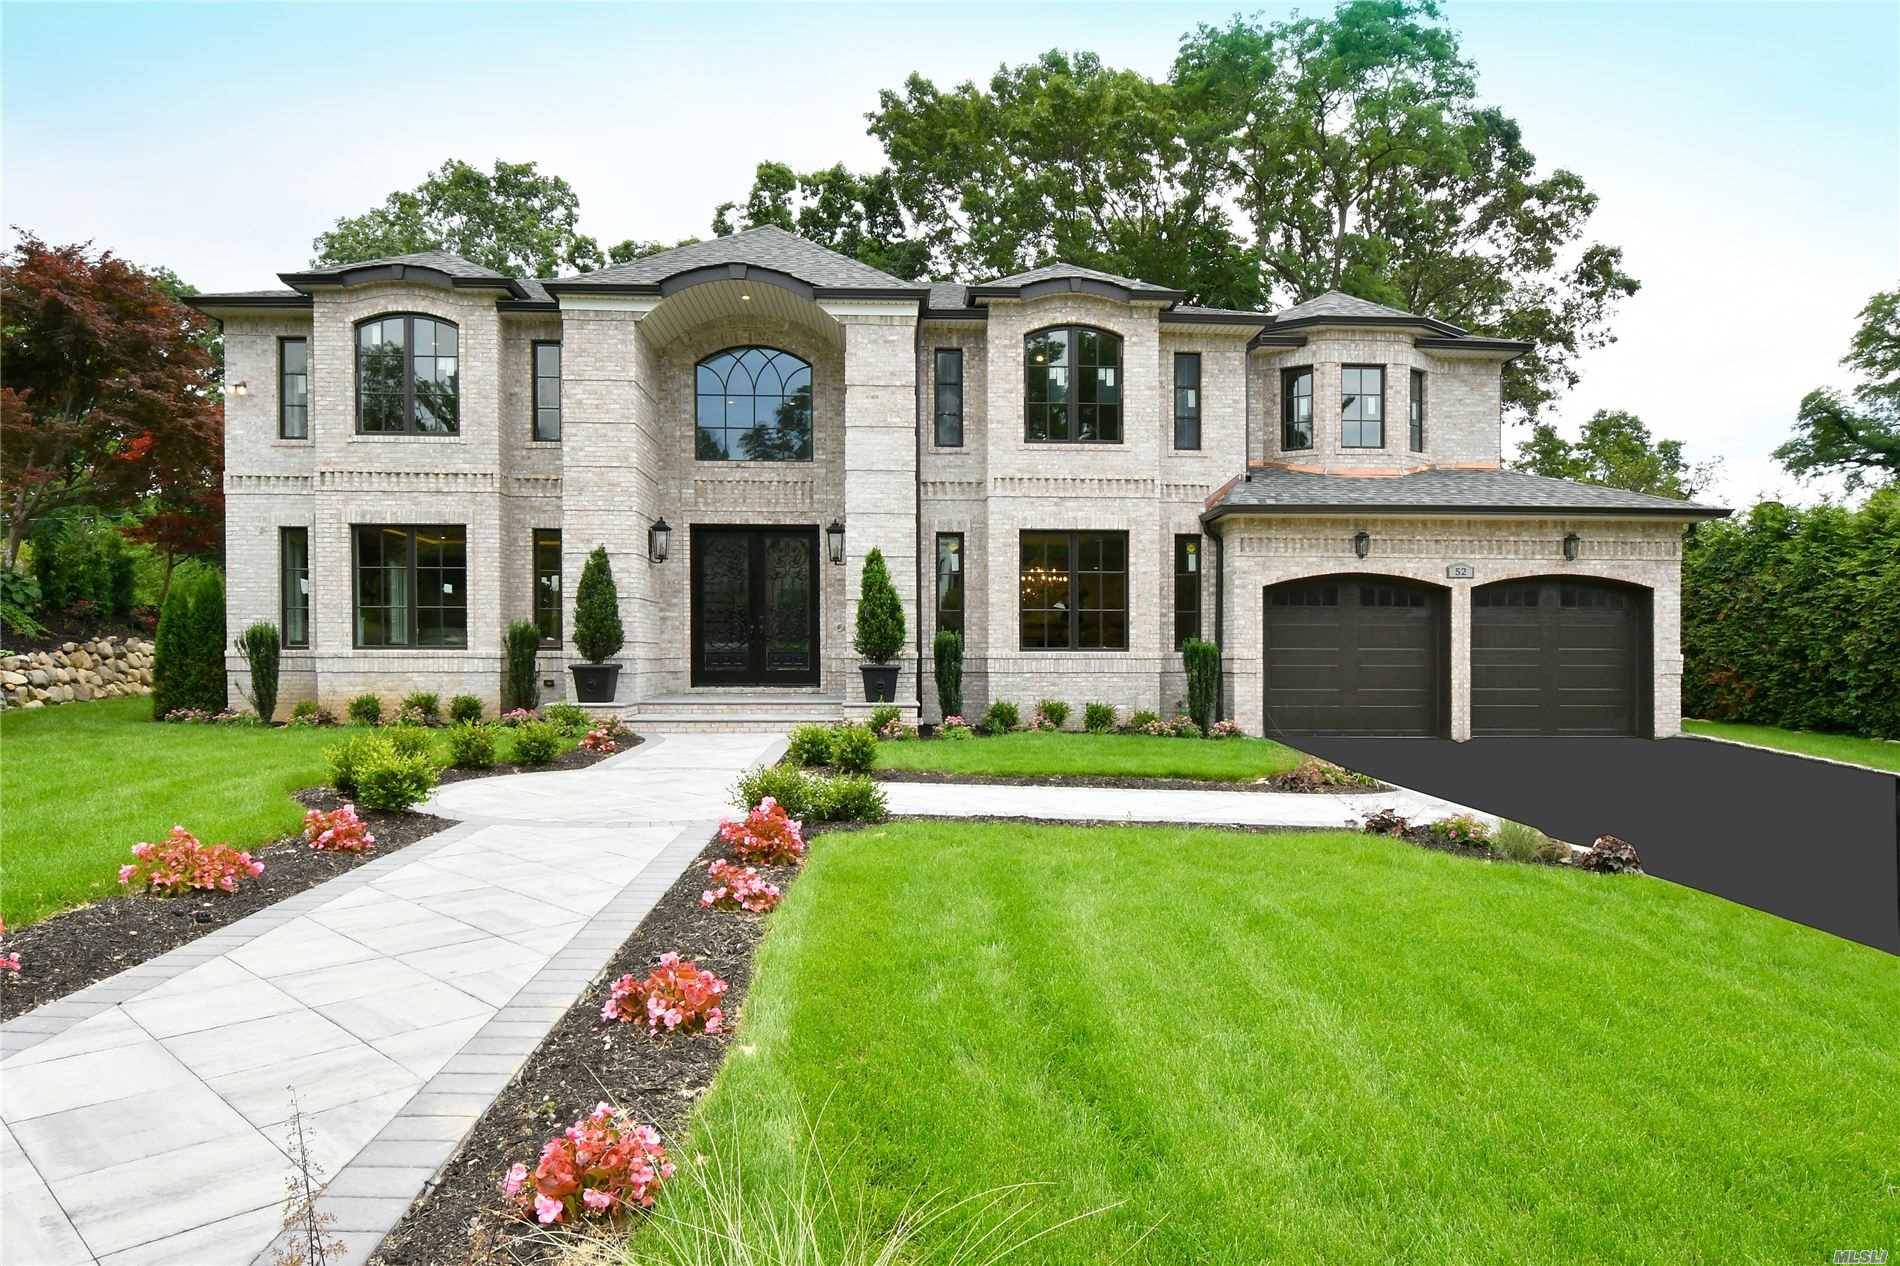 Welcome to this exquisite 5200 SF home situated in the heart of the Roslyn Country Club section of Roslyn Heights, with its award winning East Williston Schools.